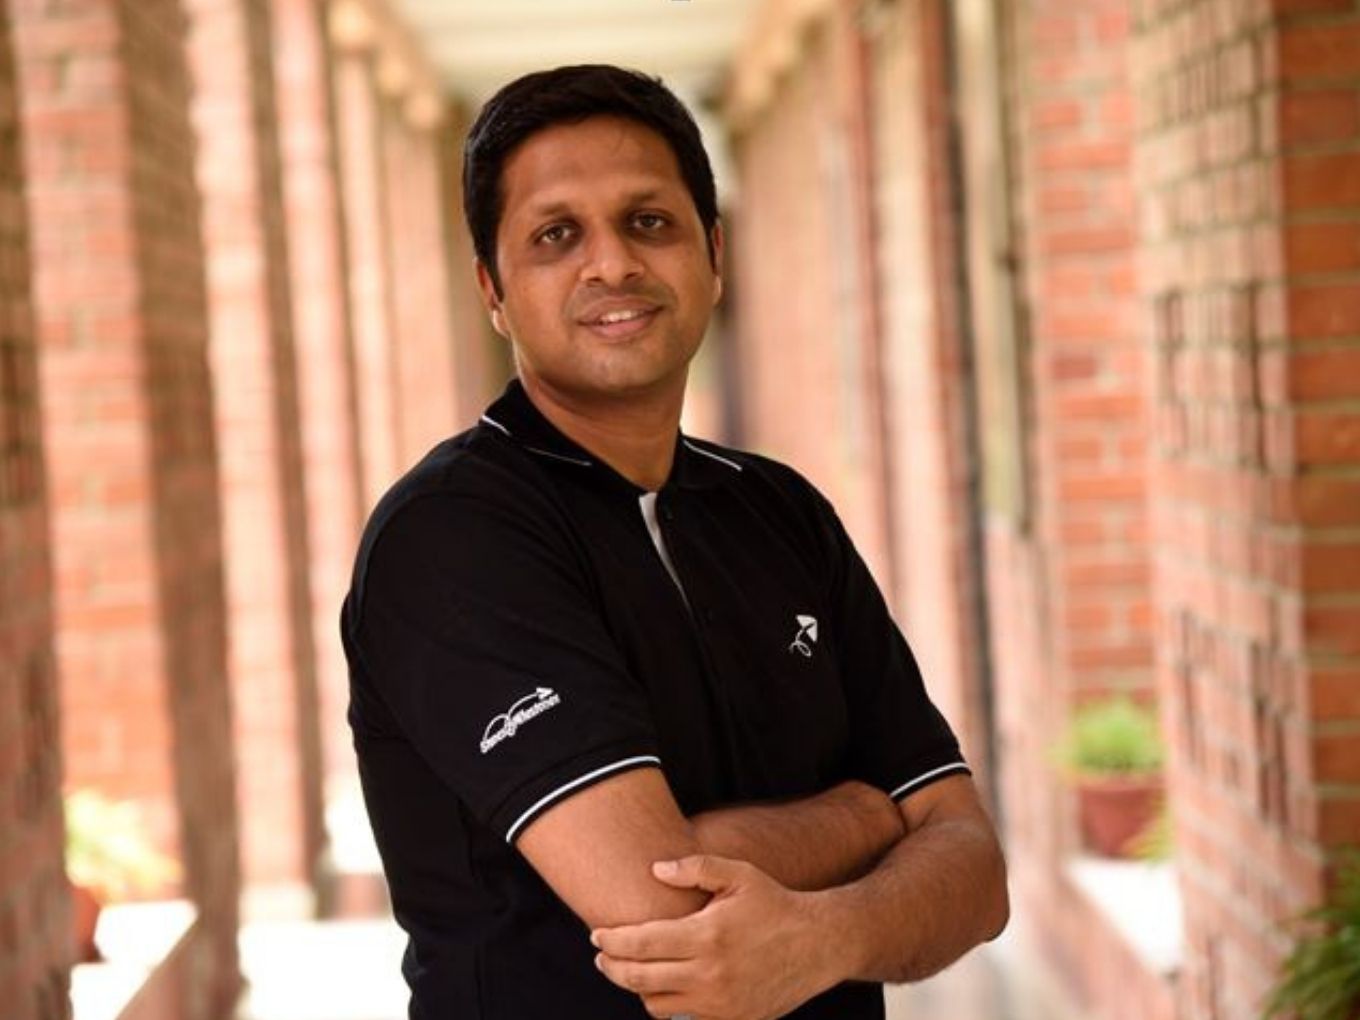 Edtech Startup Stones2Milestones Bags $2.5 Mn Funding To Leverage Its Tech Play